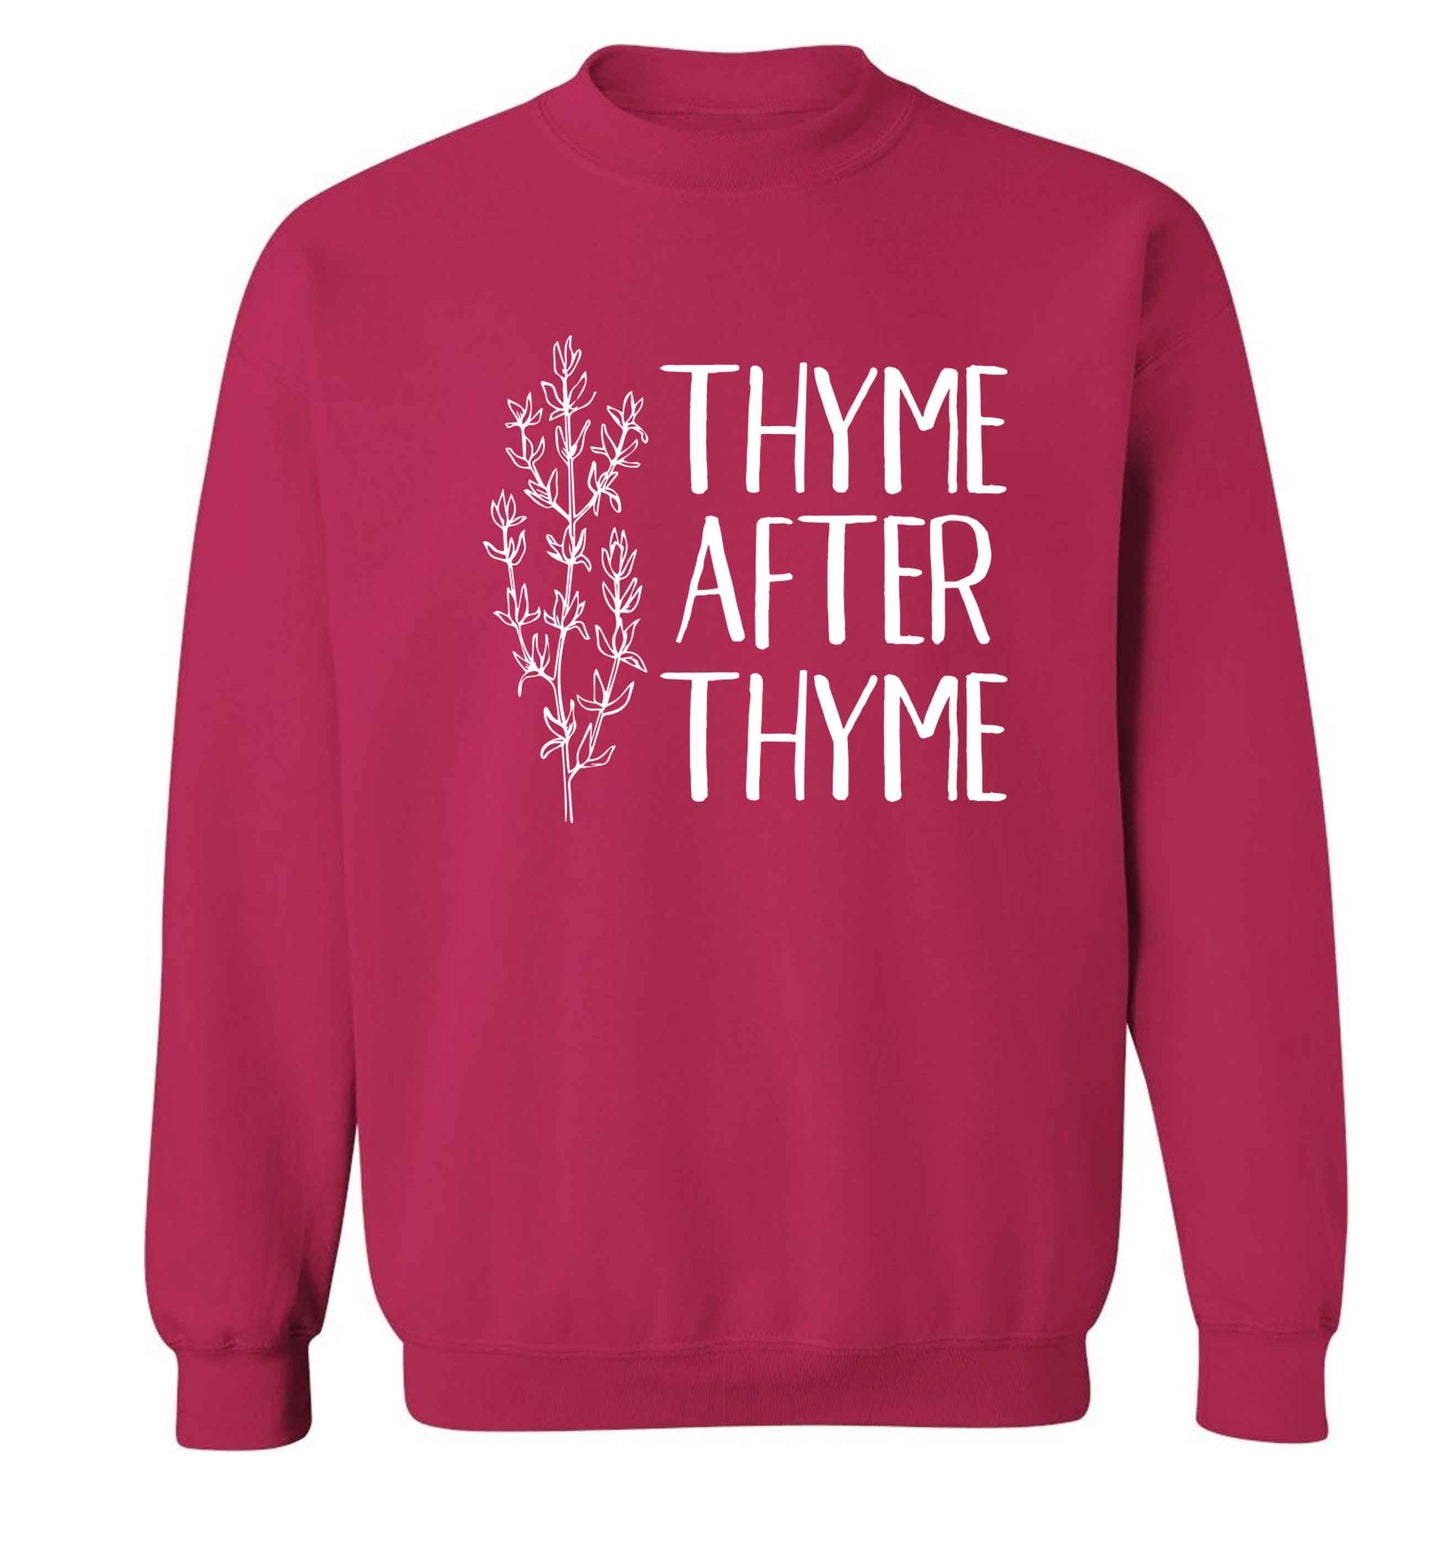 Thyme after thyme Adult's unisex pink Sweater 2XL